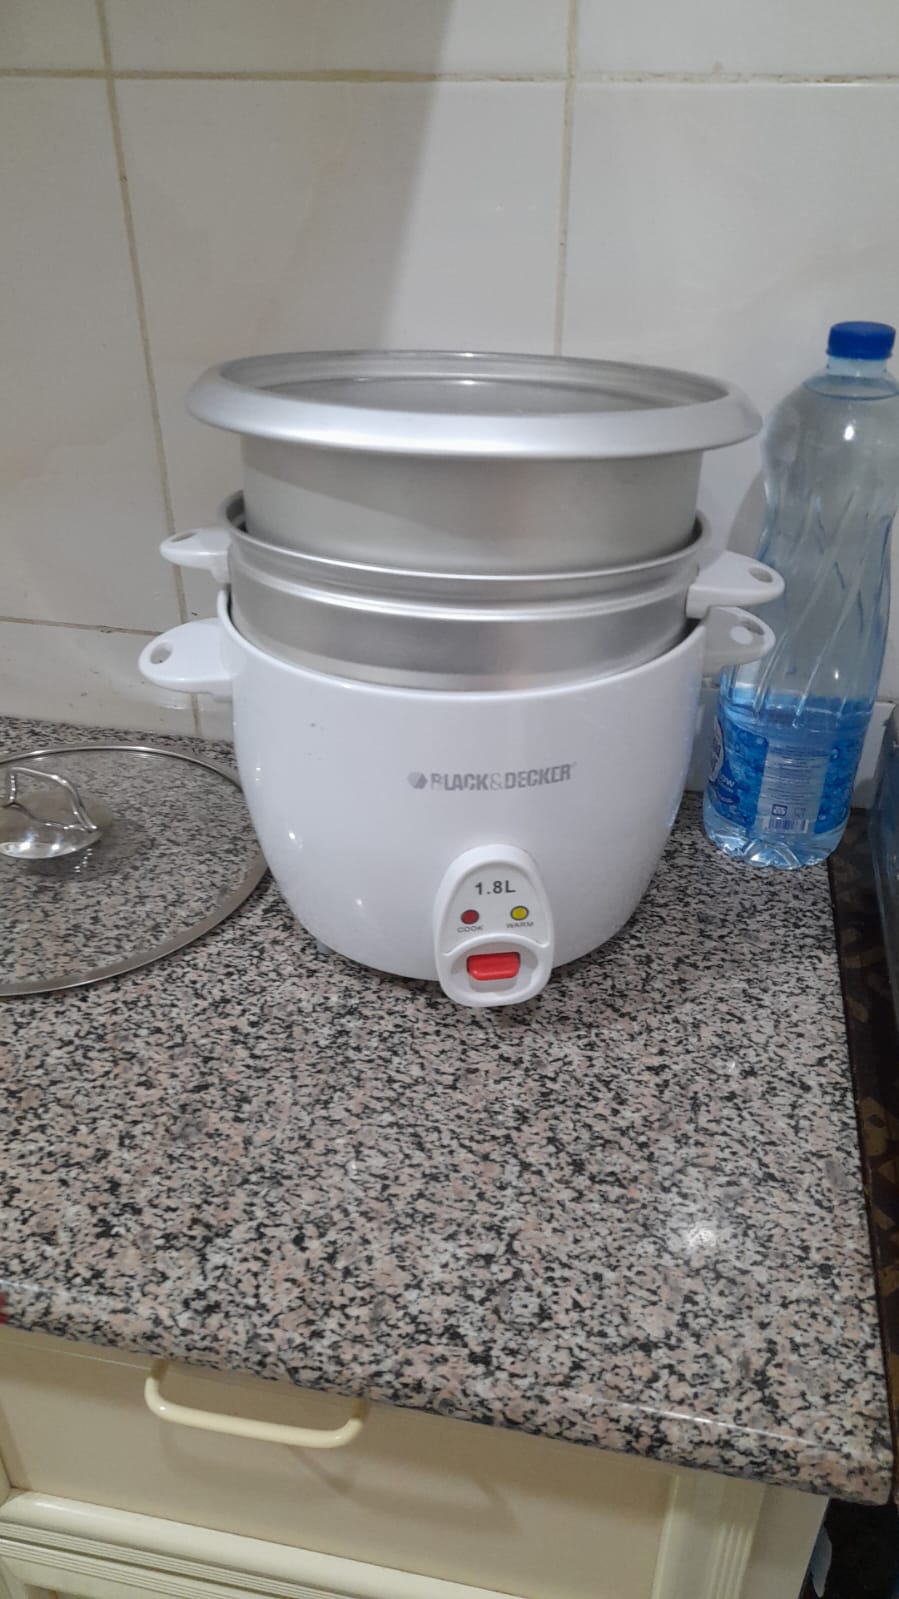 Sale Microwave oven, Rice cooker and King Bed